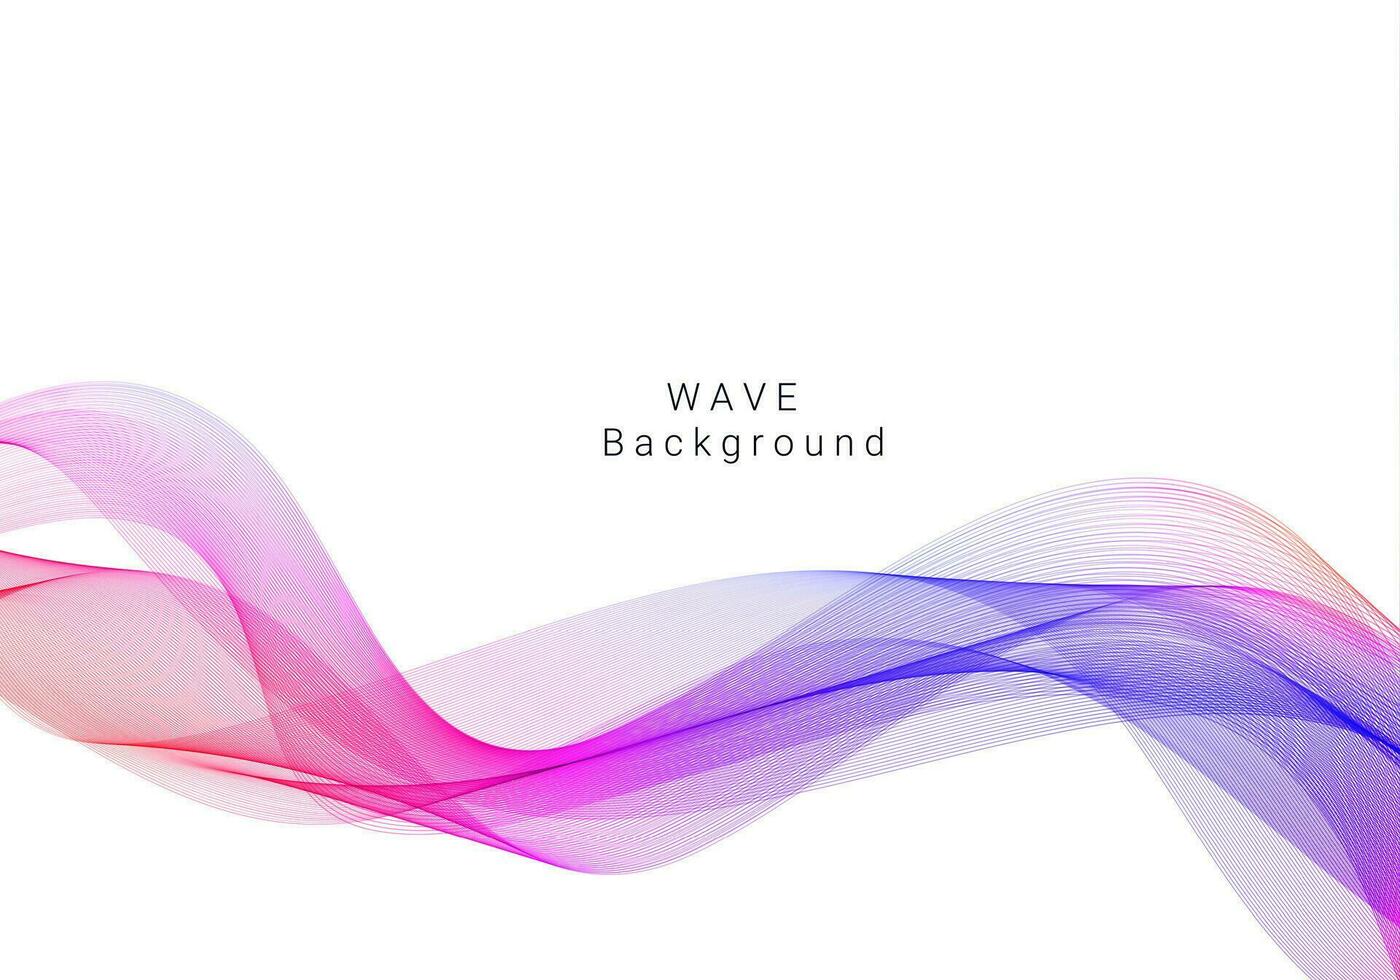 Colorful dynamic wave design stylish background vector